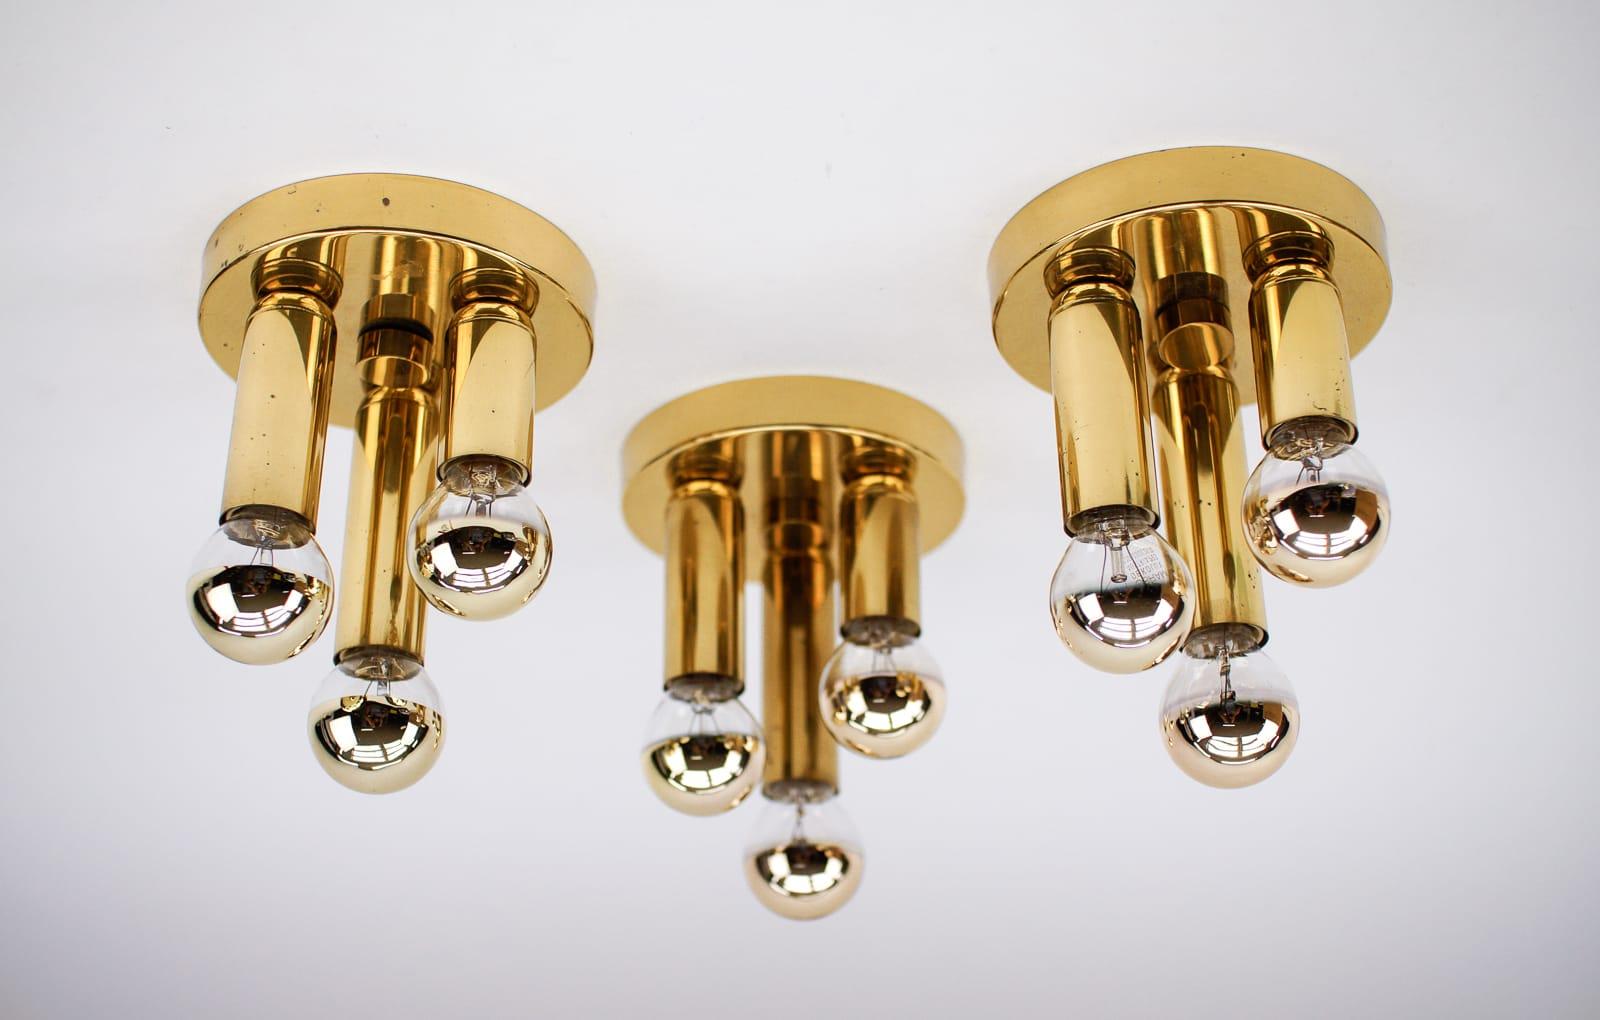 Mid-Century Modern Set of 3 Small Elegant Ceiling Lamps with Three Lights, 1970s, Germany For Sale